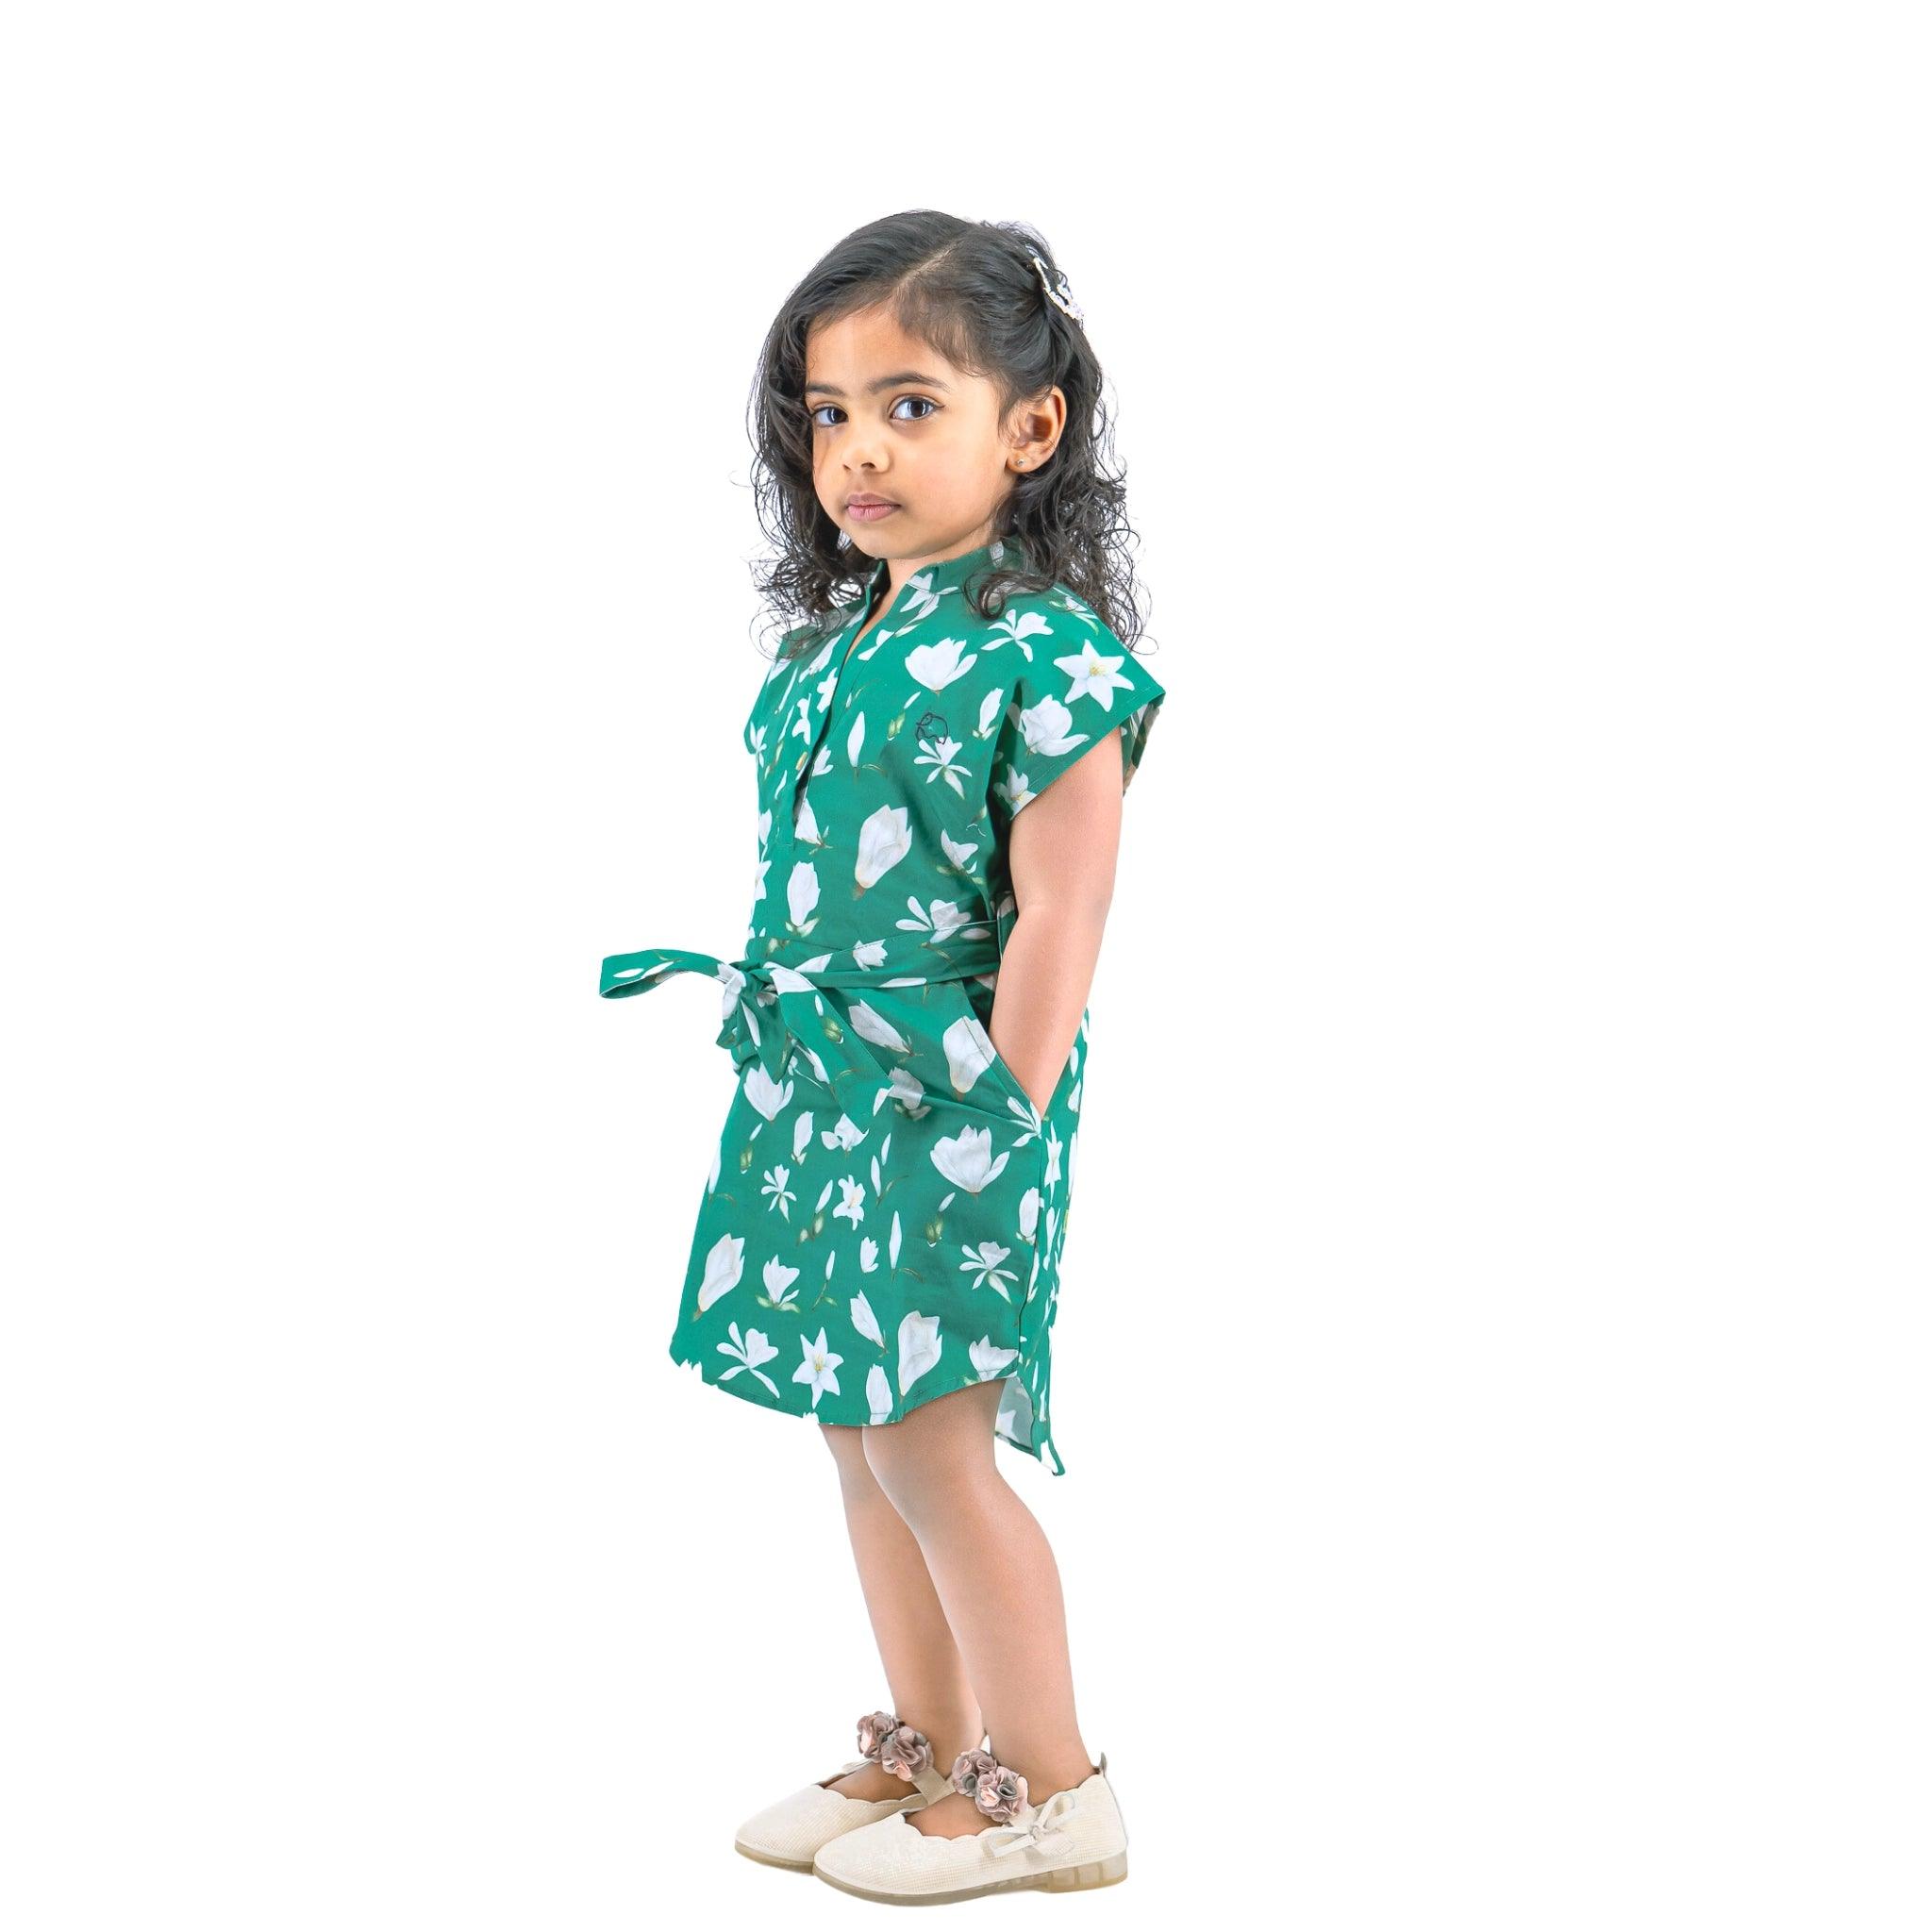 A young girl with curly hair, wearing a Karee Bottle Green Lilly Blossom Cotton Shirt Dress for Kids and white shoes, stands looking over her shoulder against a white background.